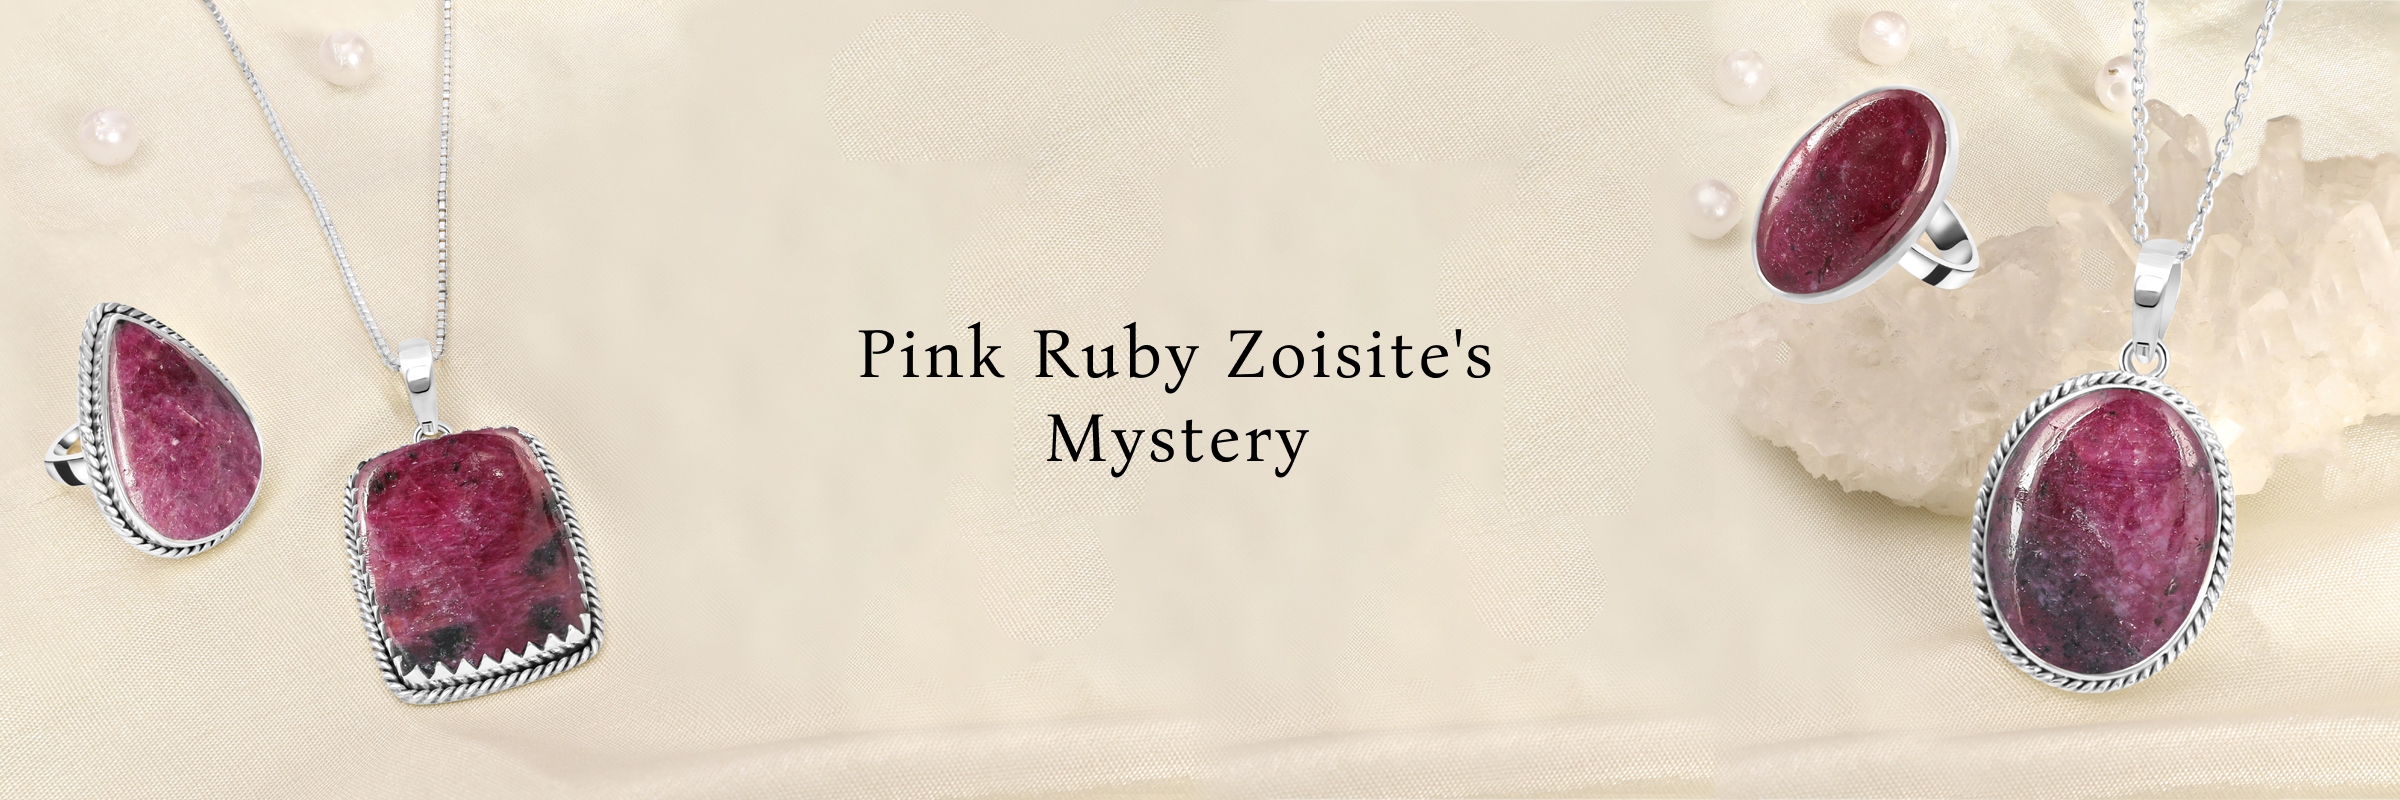 What is Pink Ruby Zoisite, basically?